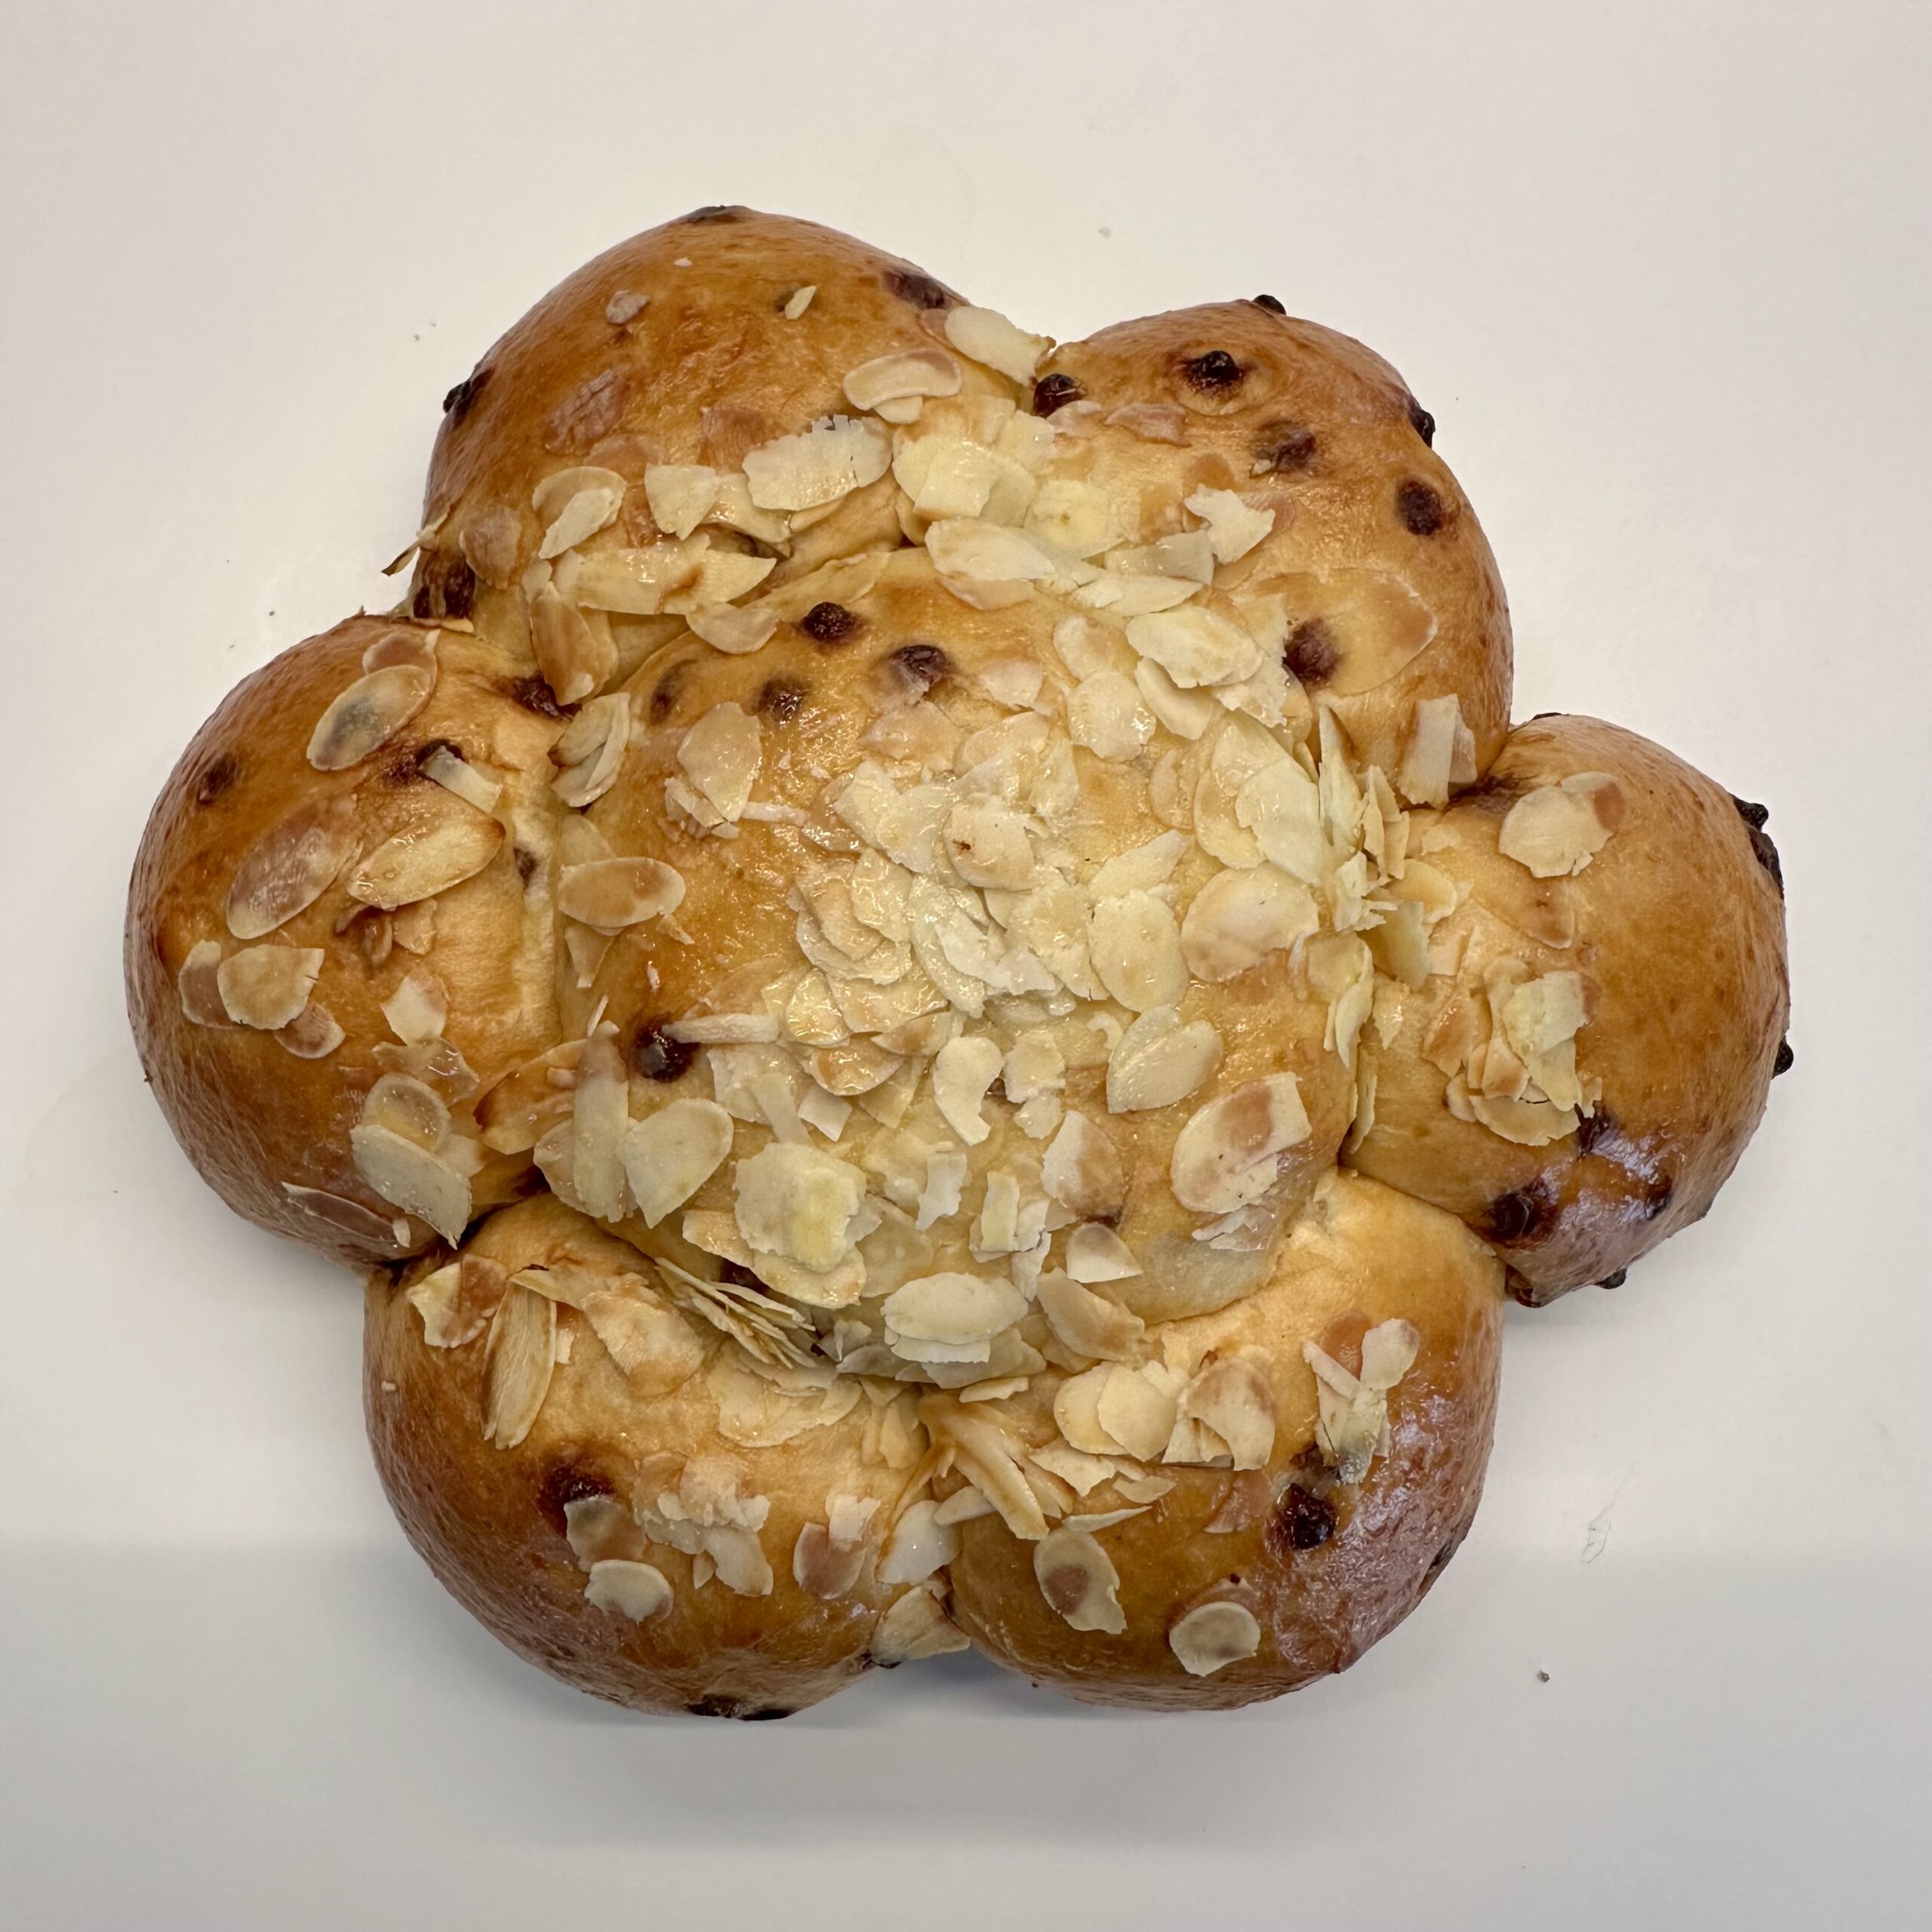 Dreikönigskuchen: a sweet bread with 6 lobes around a larger center. The bread has chocolate chips in it and is decorated with slivered almonds.